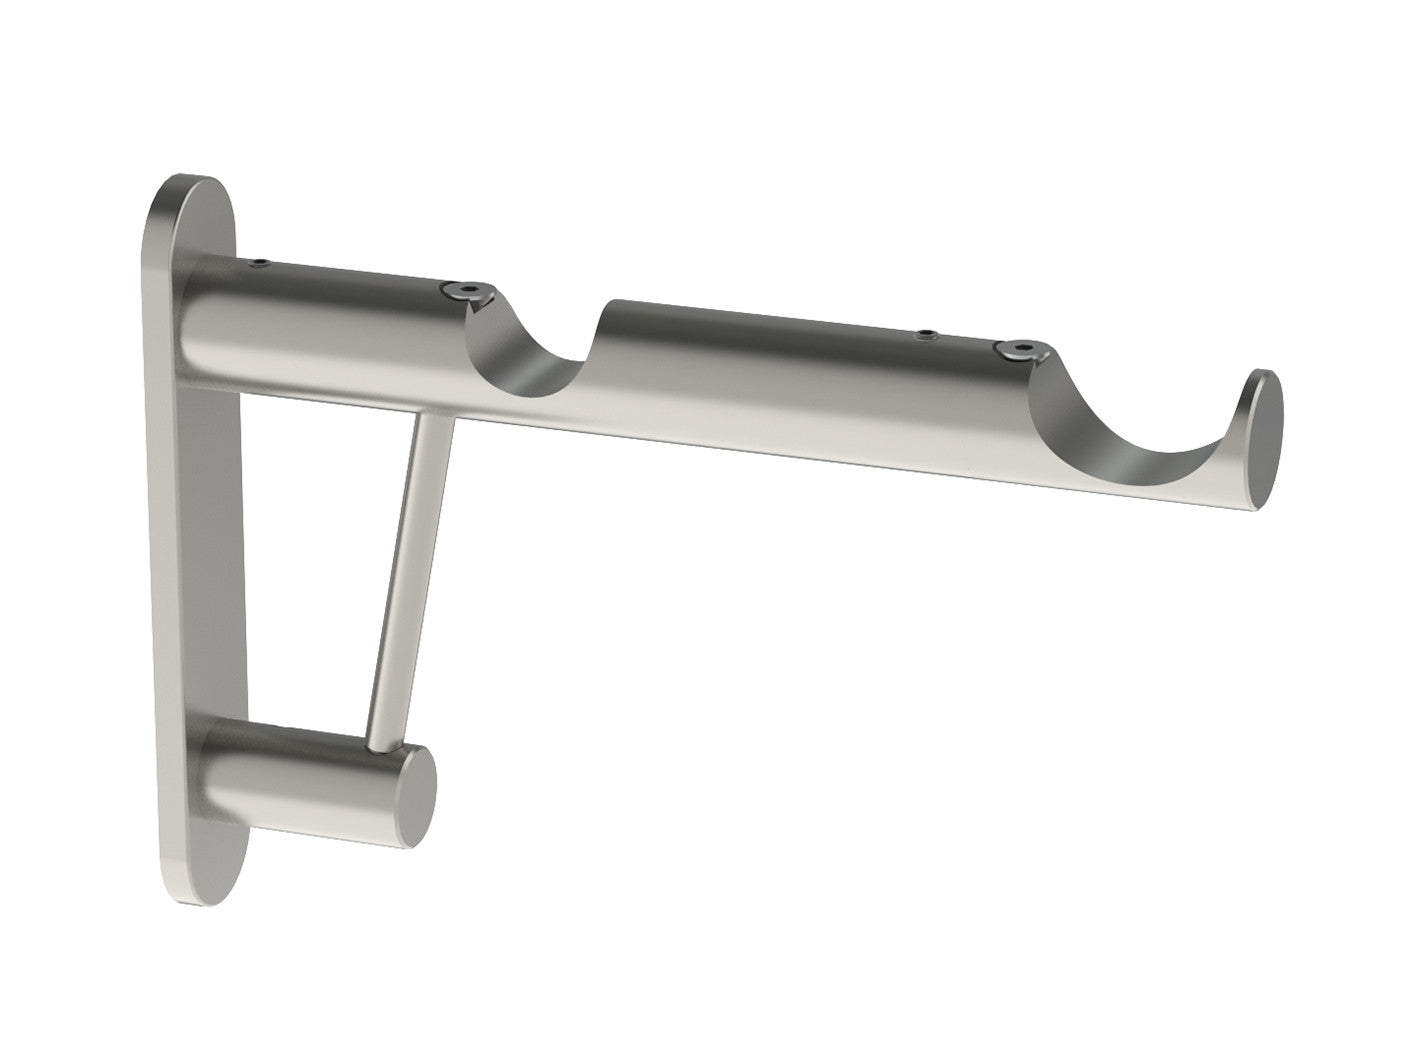 Double end bracket for 30mm and 50mm hollow metal poles in stainless steel